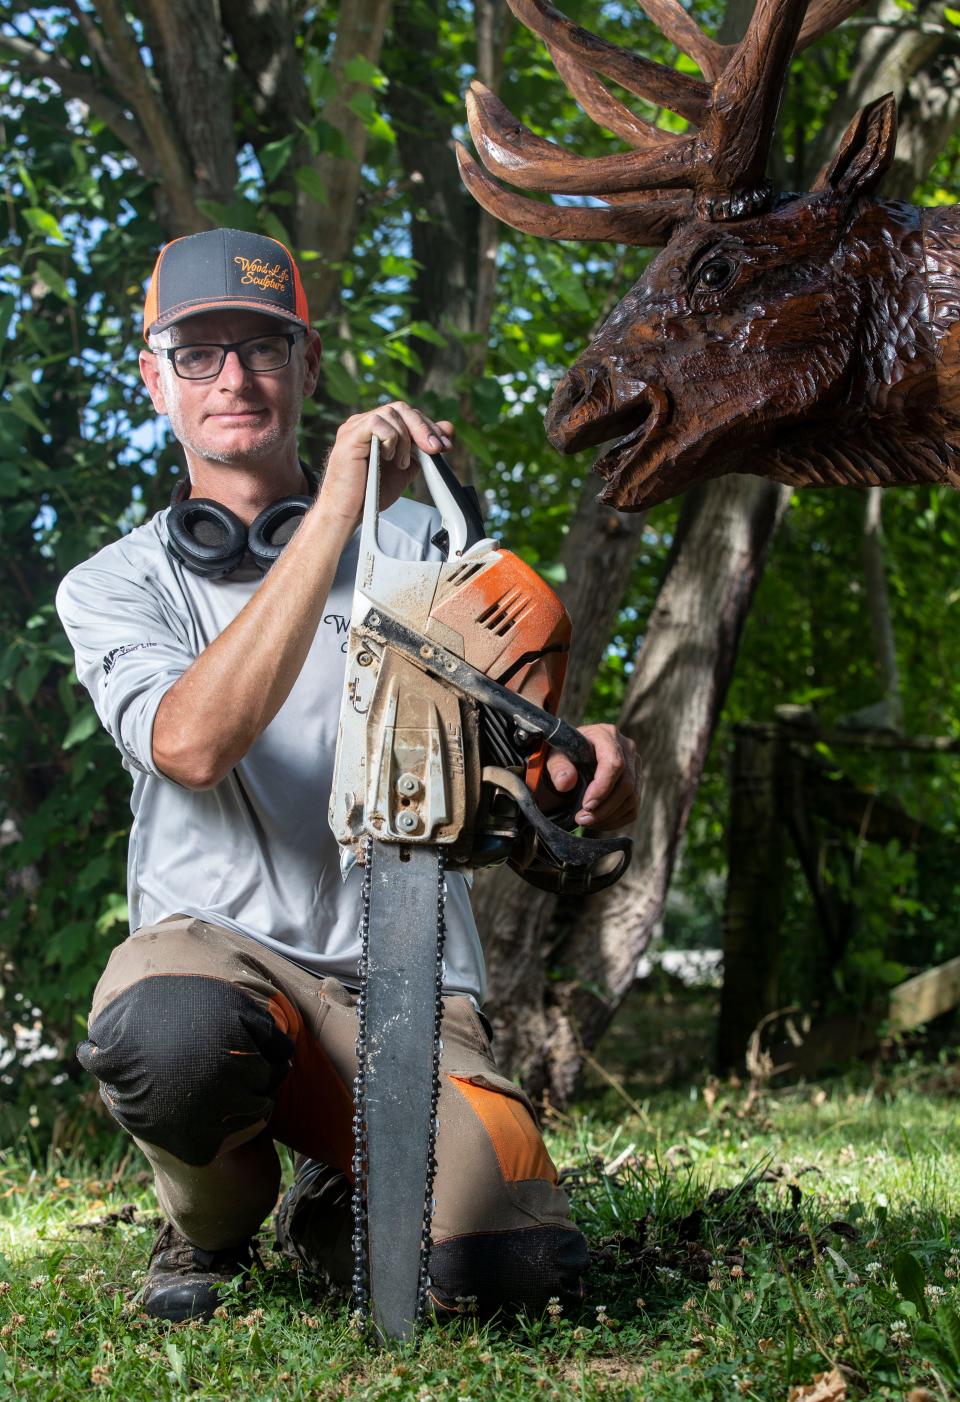 World-class chainsaw artist Abby Peterson makes a living sculpting art out of wood. Peterson lives in Webster, Ky. July 5, 2022